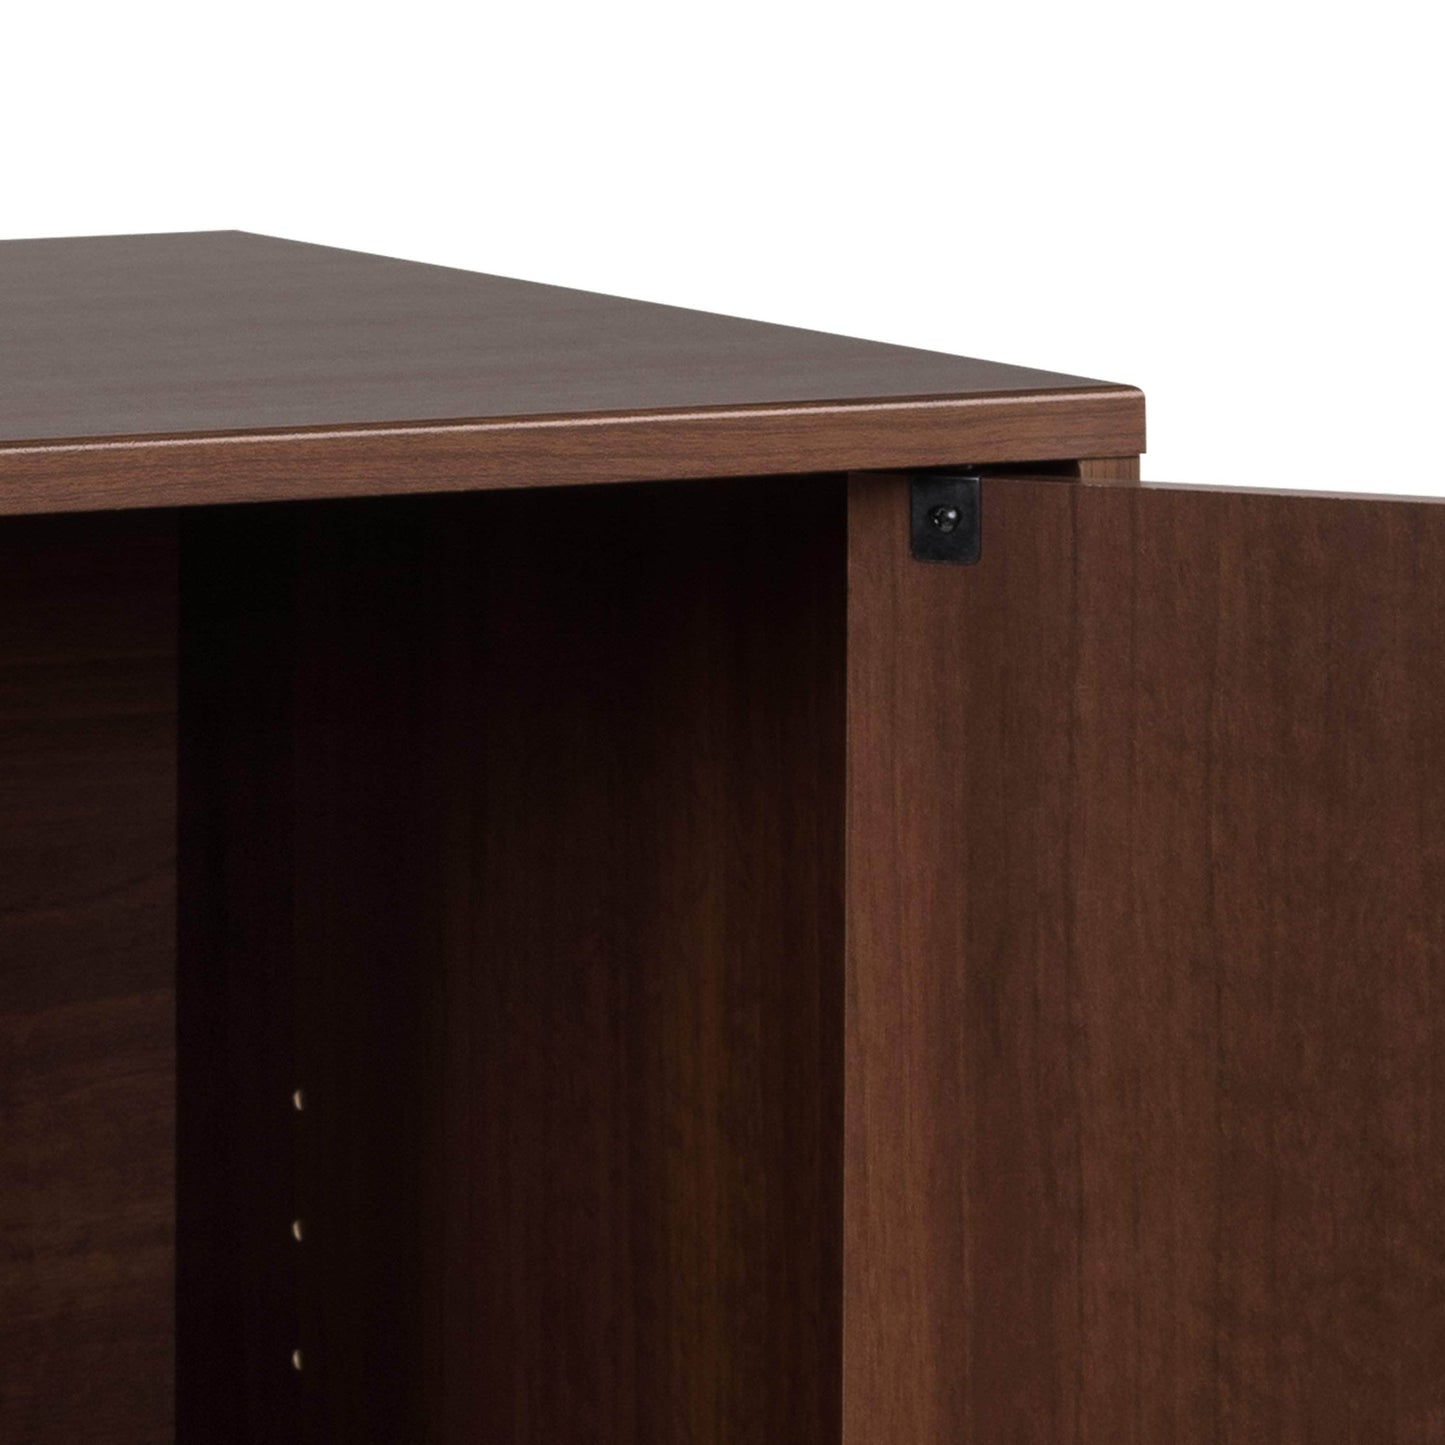 Pending - Review Drawer Chest Milo MCM 4 Drawer Chest with Door - Available in 4 Colours